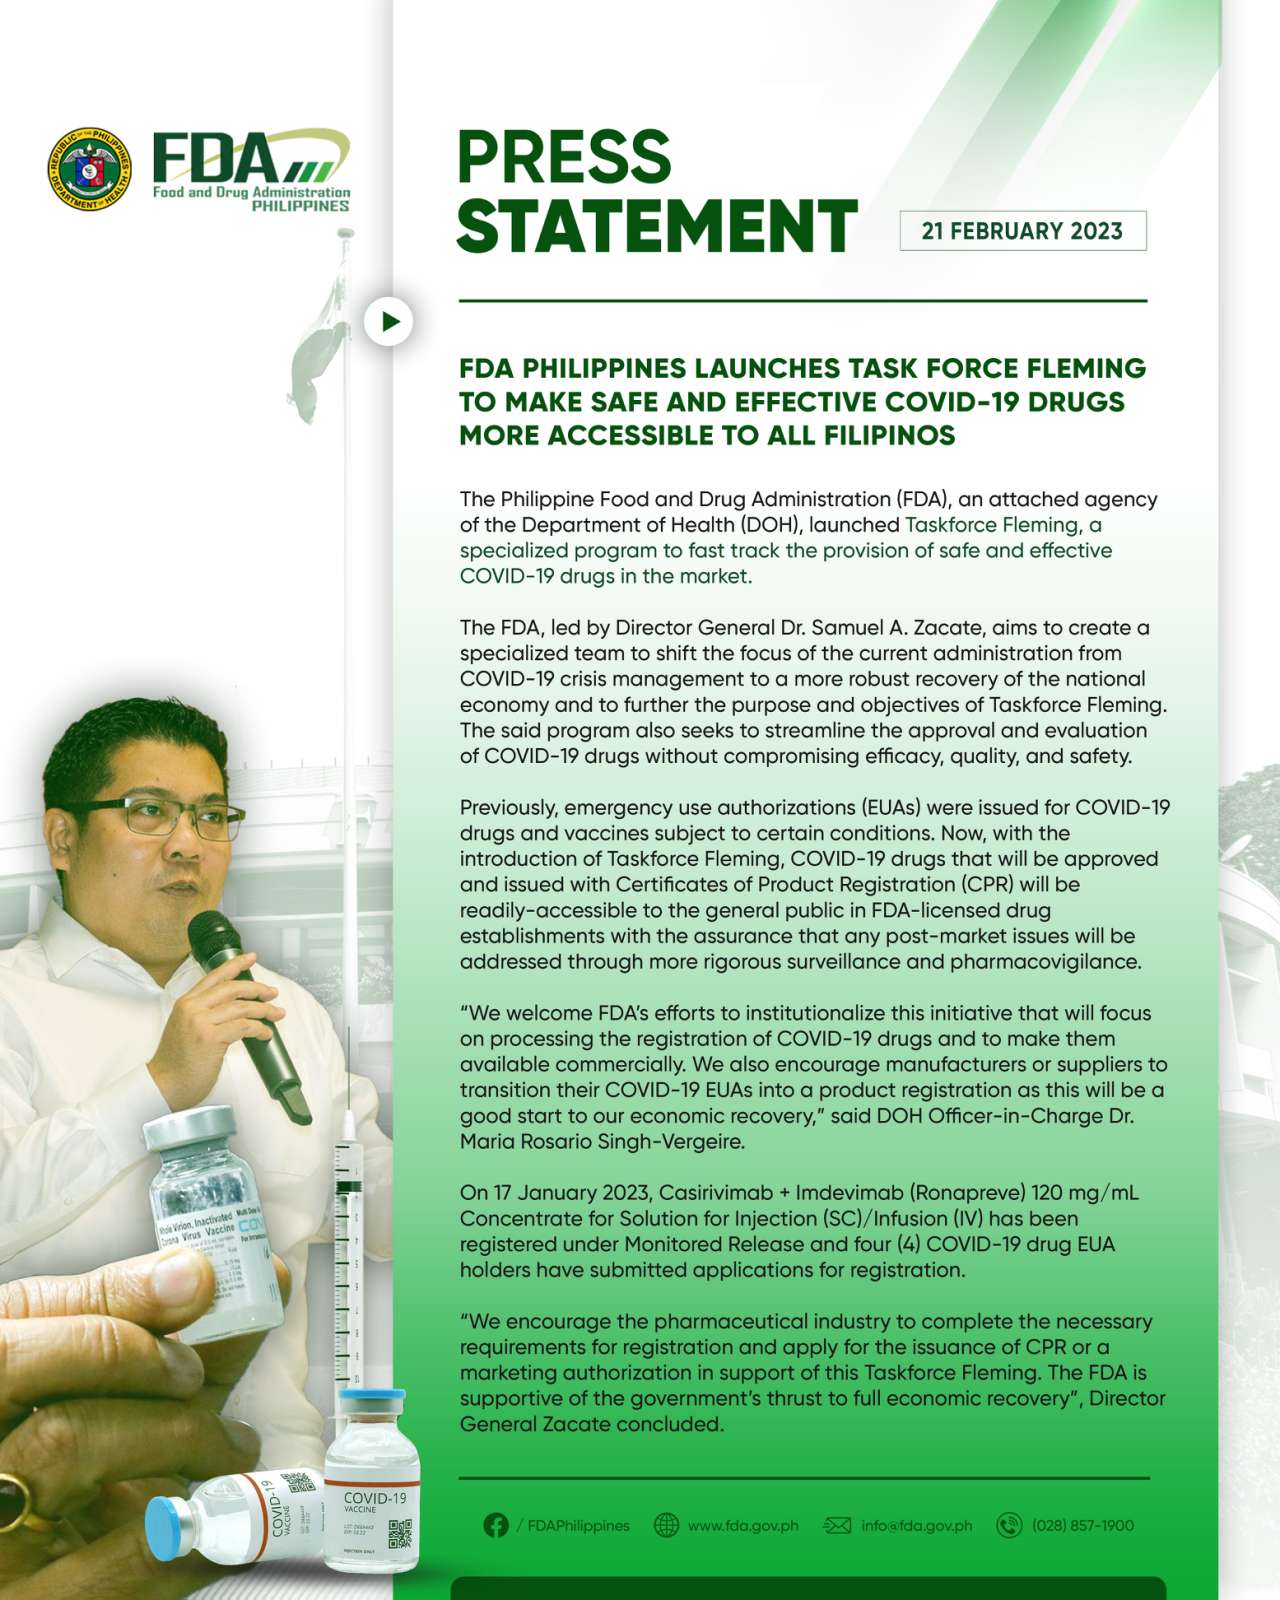 Press Statement || 21 February 2023 FDA Philippines Launches Task Force Fleming to Make Safe and Effective Covid-19 Drugs More Accessible to All Filipinos.